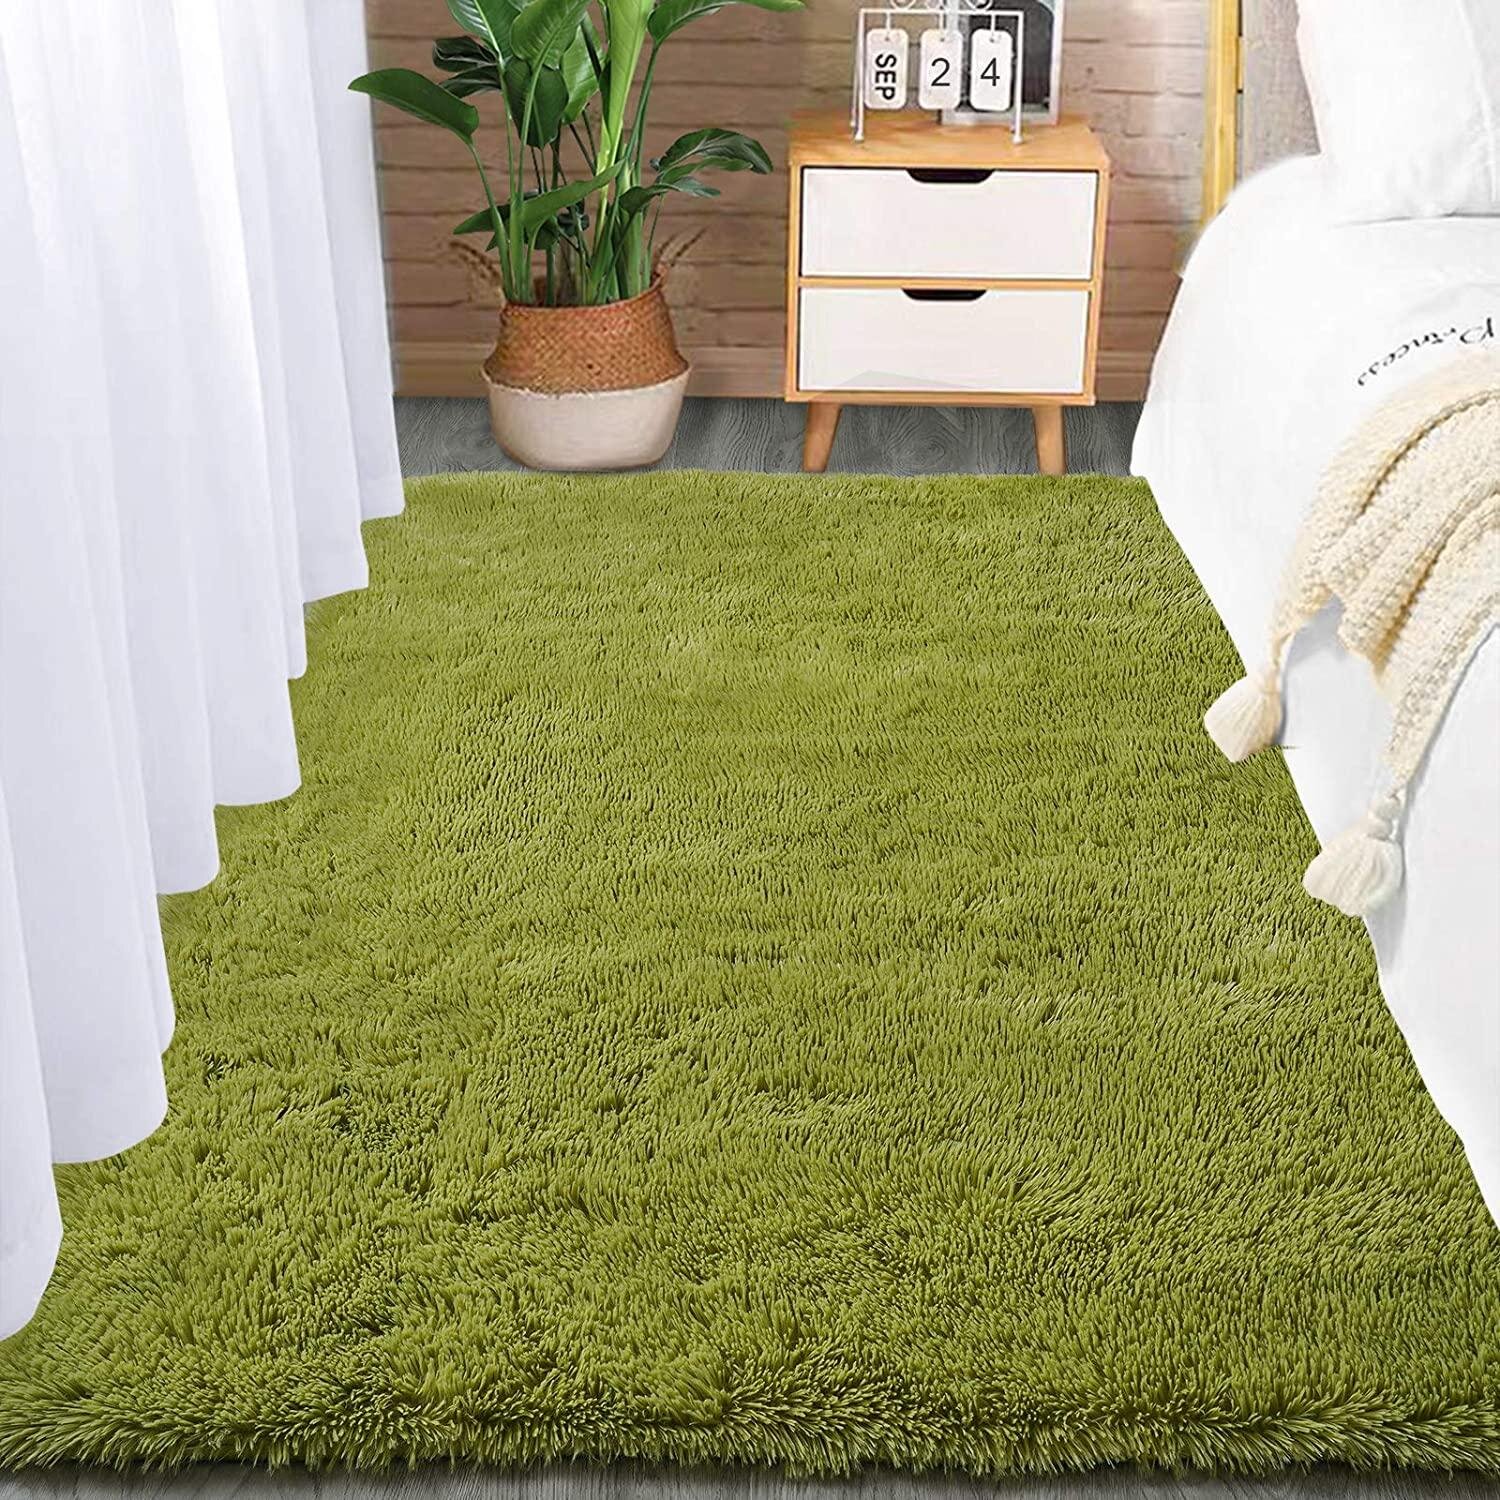 Soft Modern Deep Shaggy Rugs Bedroom Living Extra Comfy Fur Home Indoor Runners